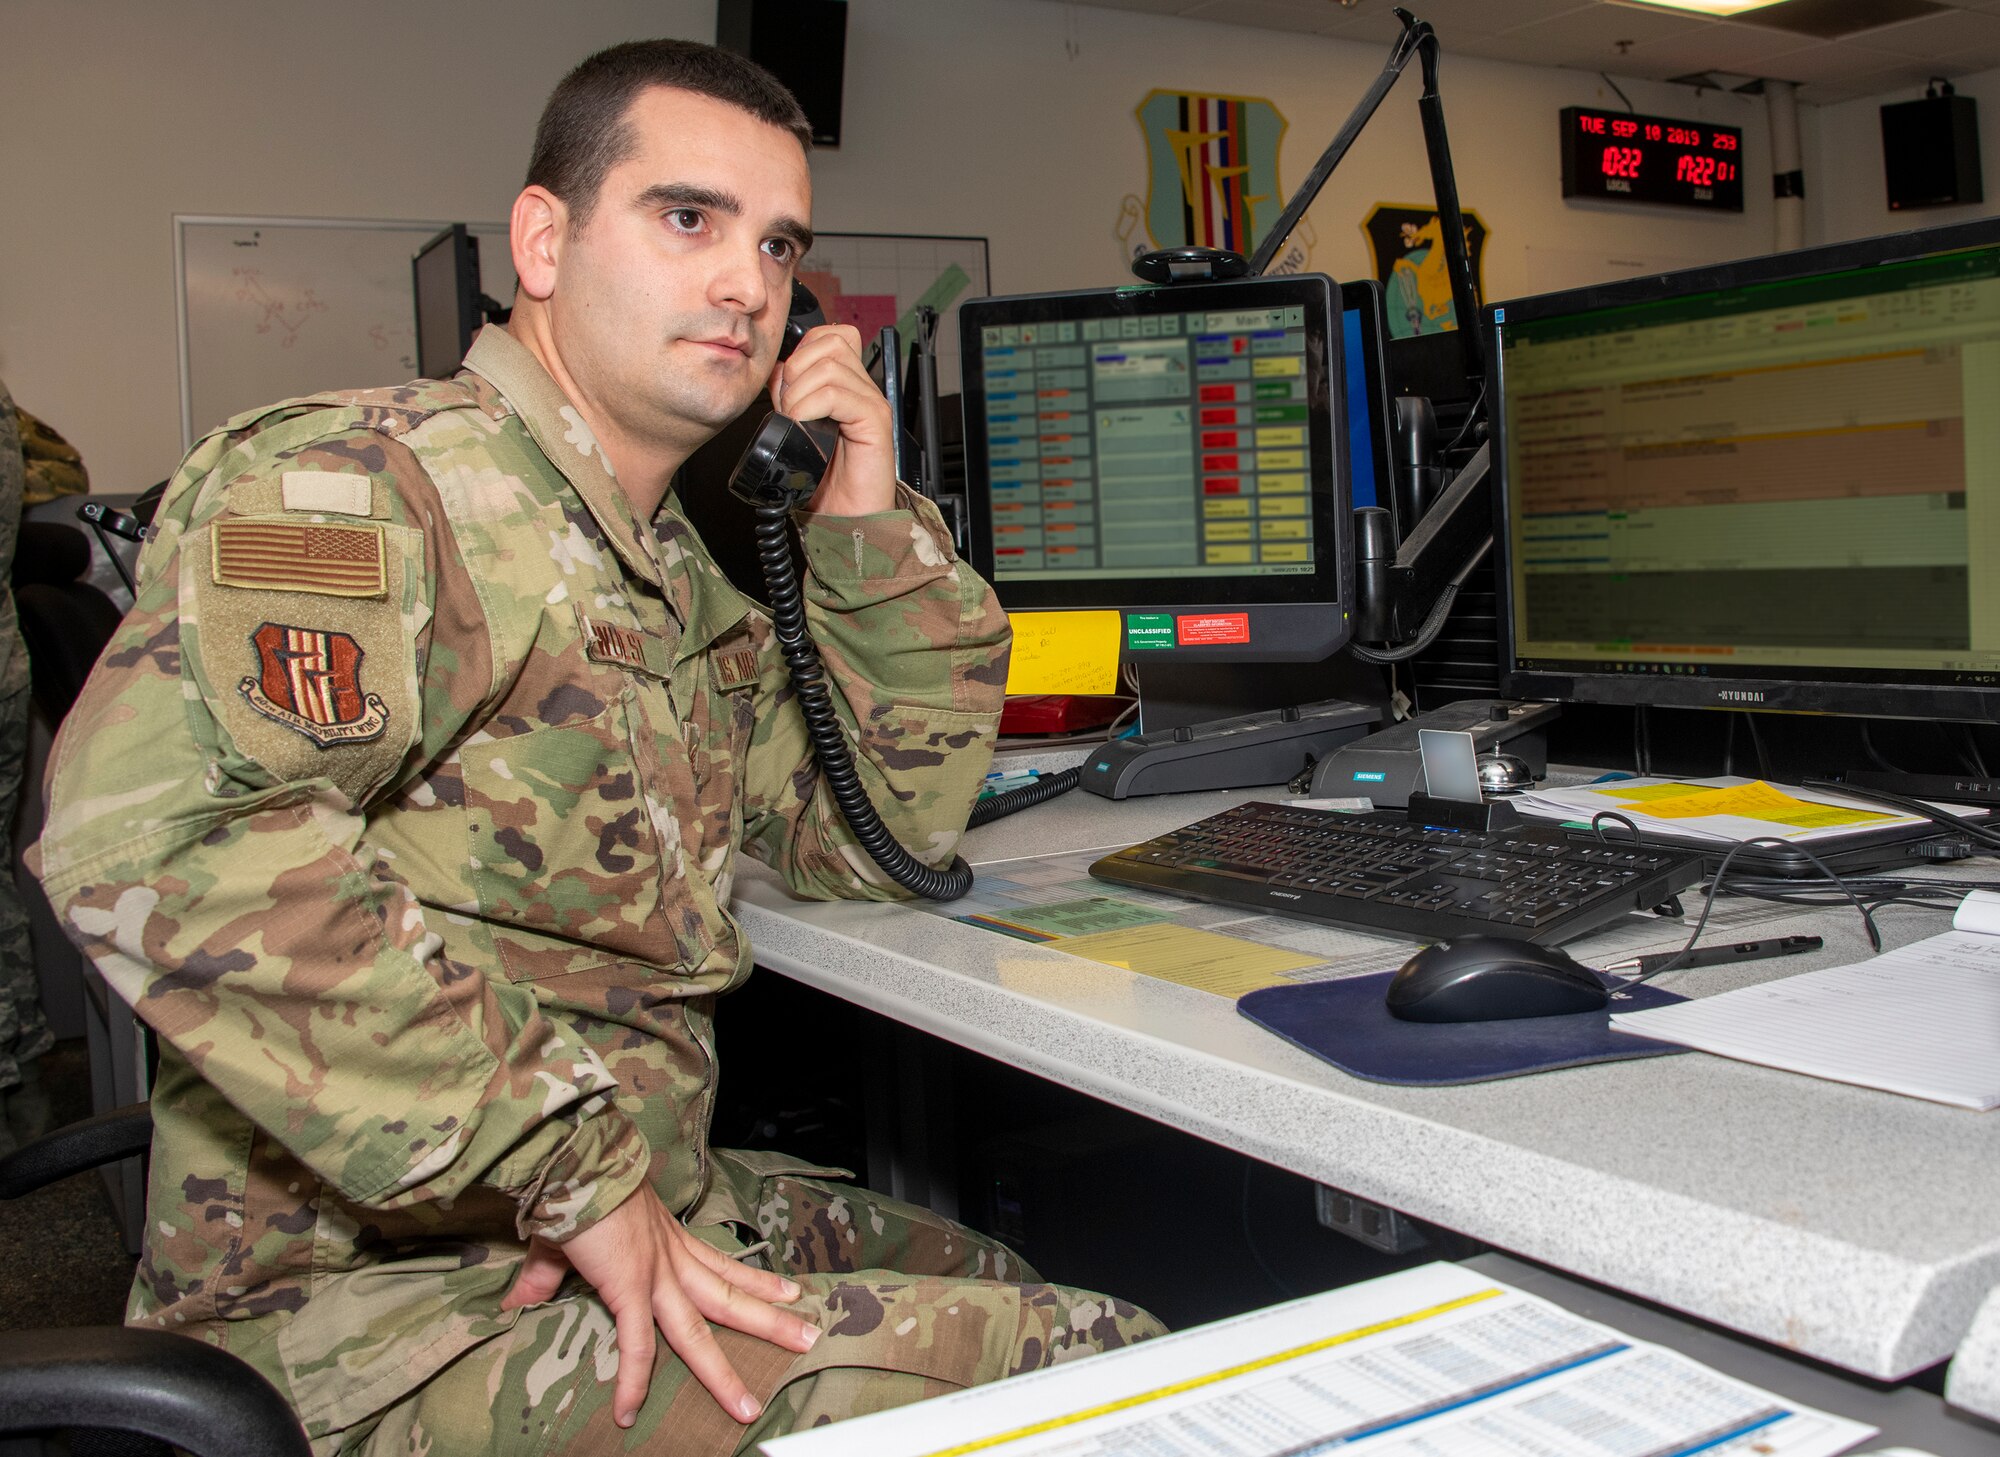 U. S. Air Force Tech. Sgt. Christopher Wuest, 60th Air Mobility Wing Command Post NCO in charge of command and control operations reports, receives an incoming call Sept. 10, 2019, at Travis Air Force Base, California. Wuest is the 60th Air Mobility Wing Warrior of the Week for Sept. 8-14, 2019.  The Warrior of the Week program recognizes an outstanding Travis Airman or noncommissioned officer. (photo altered for security reasons)  (U.S. Air Force photo illustration by Heide Couch)